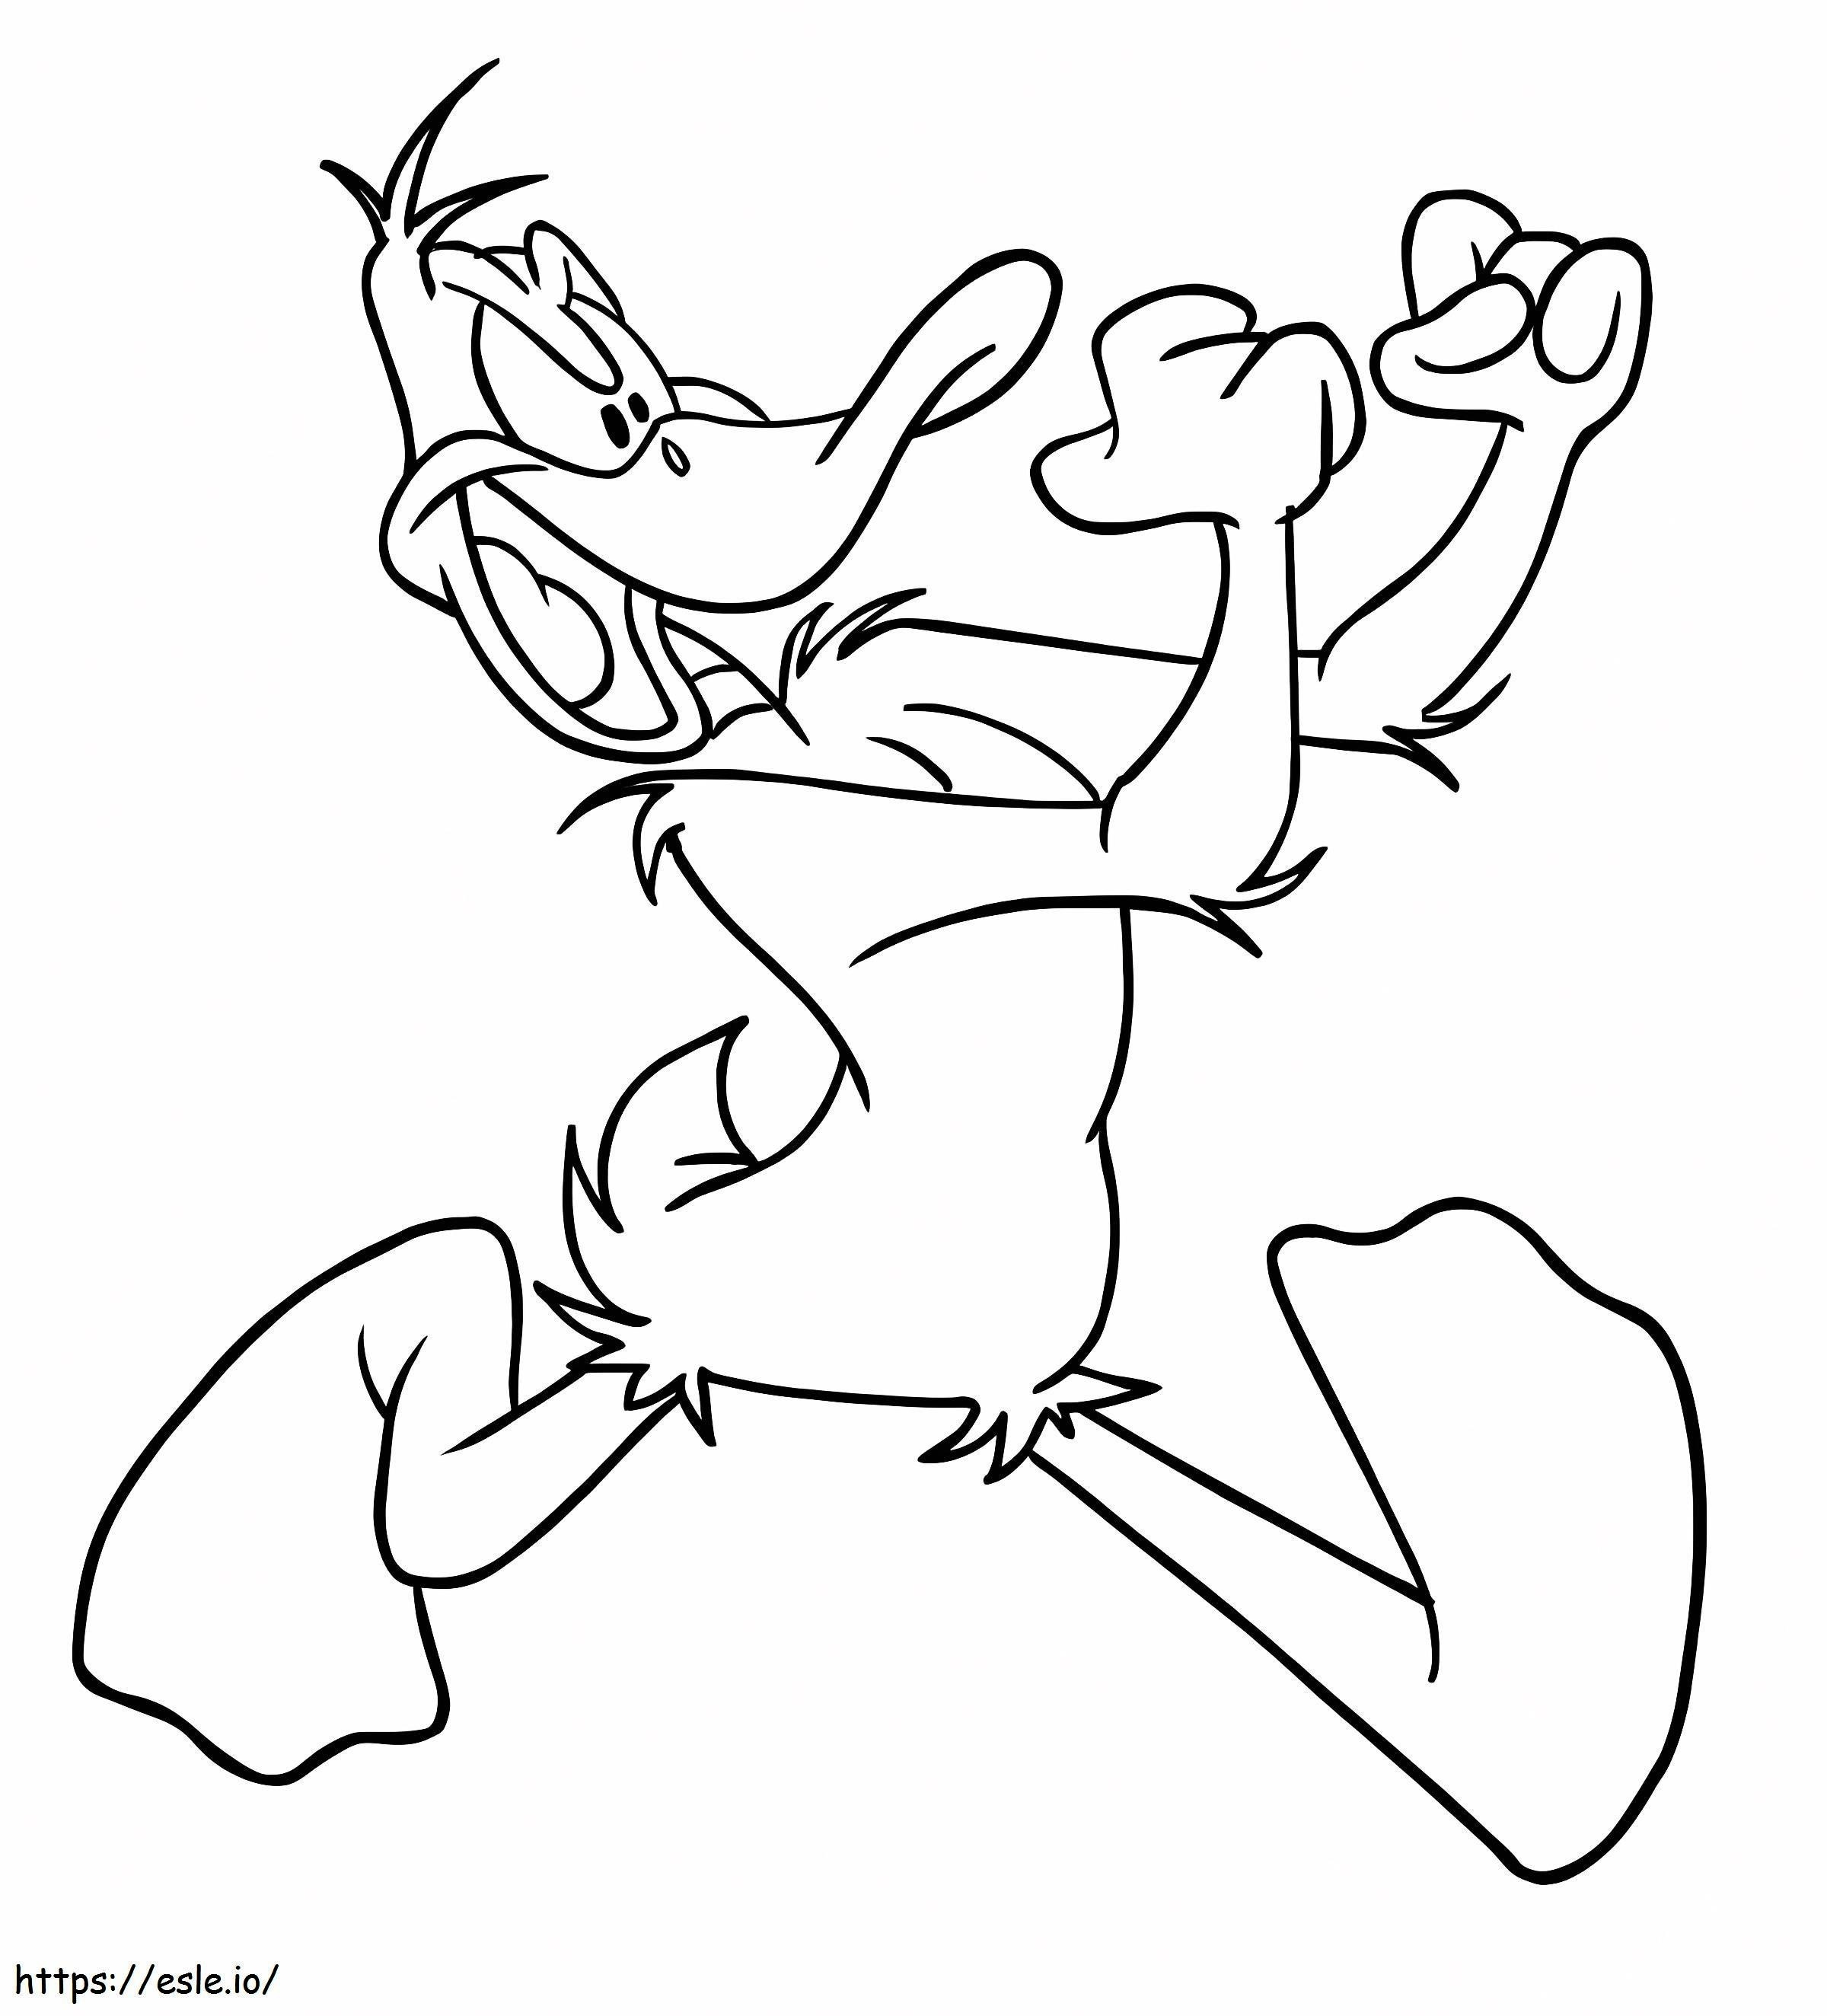 Daffy Duck Fight coloring page